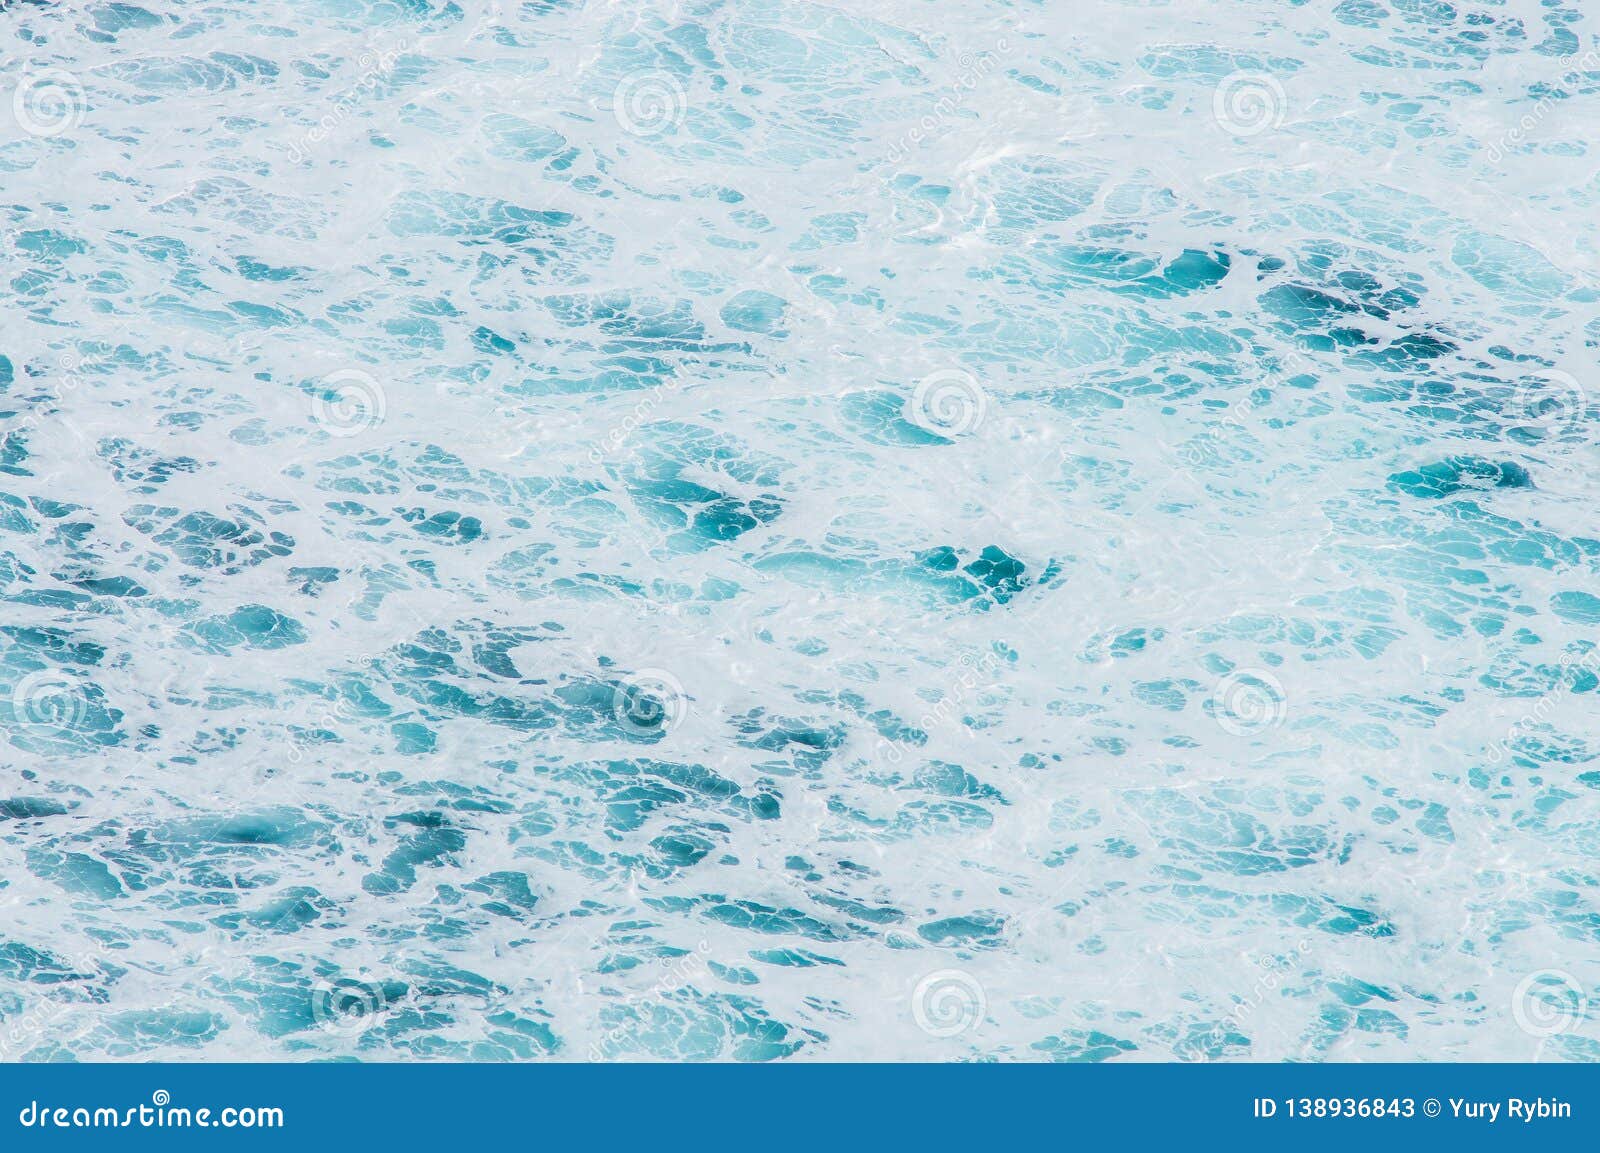 Texture Of The Ocean Natural Background Of Blue Green Sea Water With